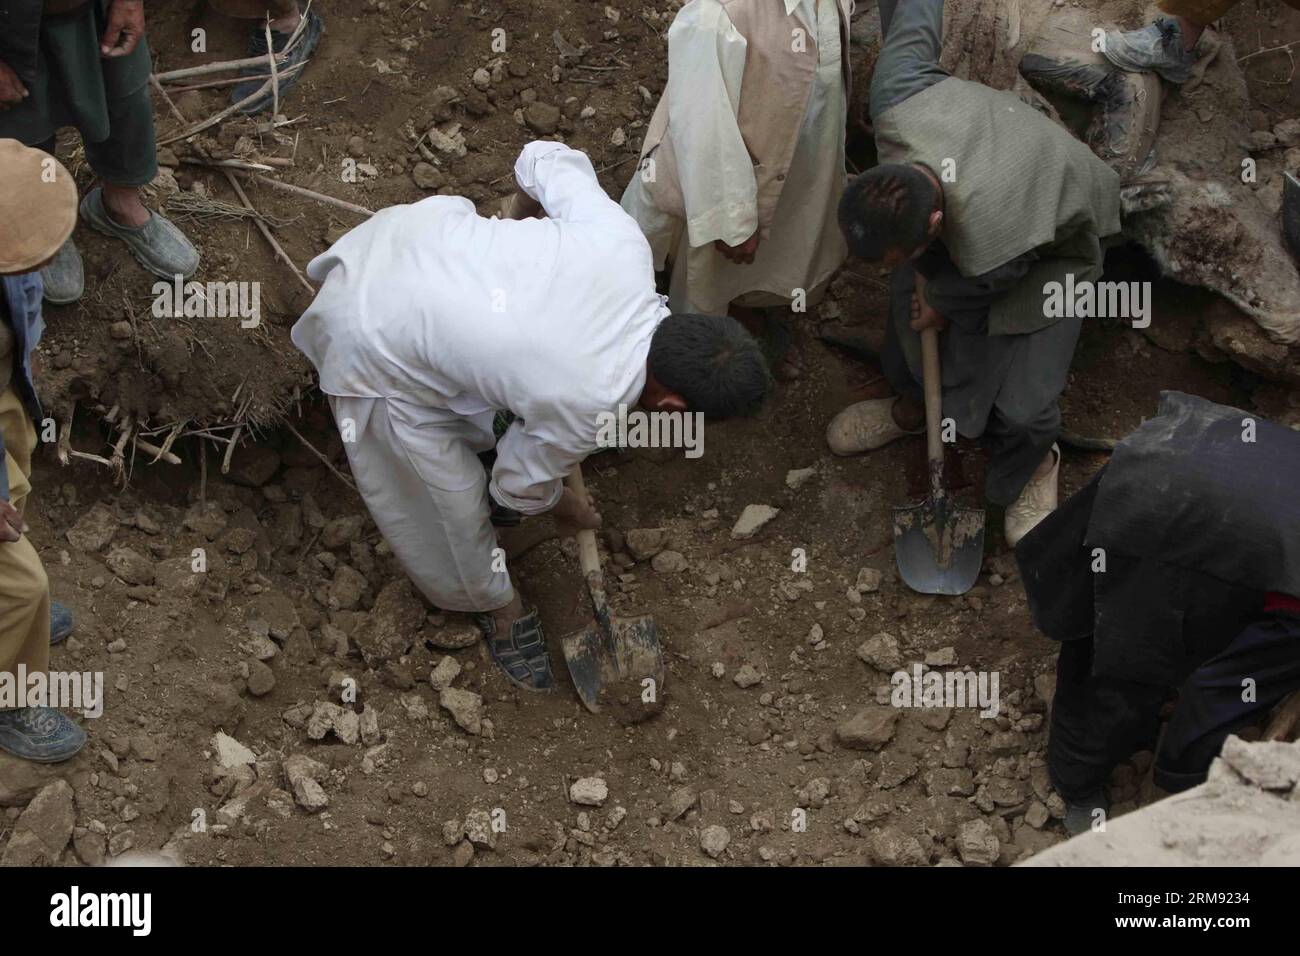 (140504) -- BADAKHSHAN,  (Xinhua) -- People search dead bodies of victims after a landslide in Badakhshan, Afghanistan, May 3, 2014. A massive landslide hit a village in northern Afghan Badakhshan province on Friday, causing heavy casualties, but the exact number of deaths and injuries remained unknown Saturday as officials here released contradictory numbers. (Xinhua/Ahmad Massoud) AFGHNAISTAN-BADAKHSHAN-LANDSLIDE PUBLICATIONxNOTxINxCHN   Badakhshan XINHUA Celebrities Search Dead Bodies of Victims After a landslide in Badakhshan Afghanistan May 3 2014 a Massive landslide Hit a Village in Nort Stock Photo